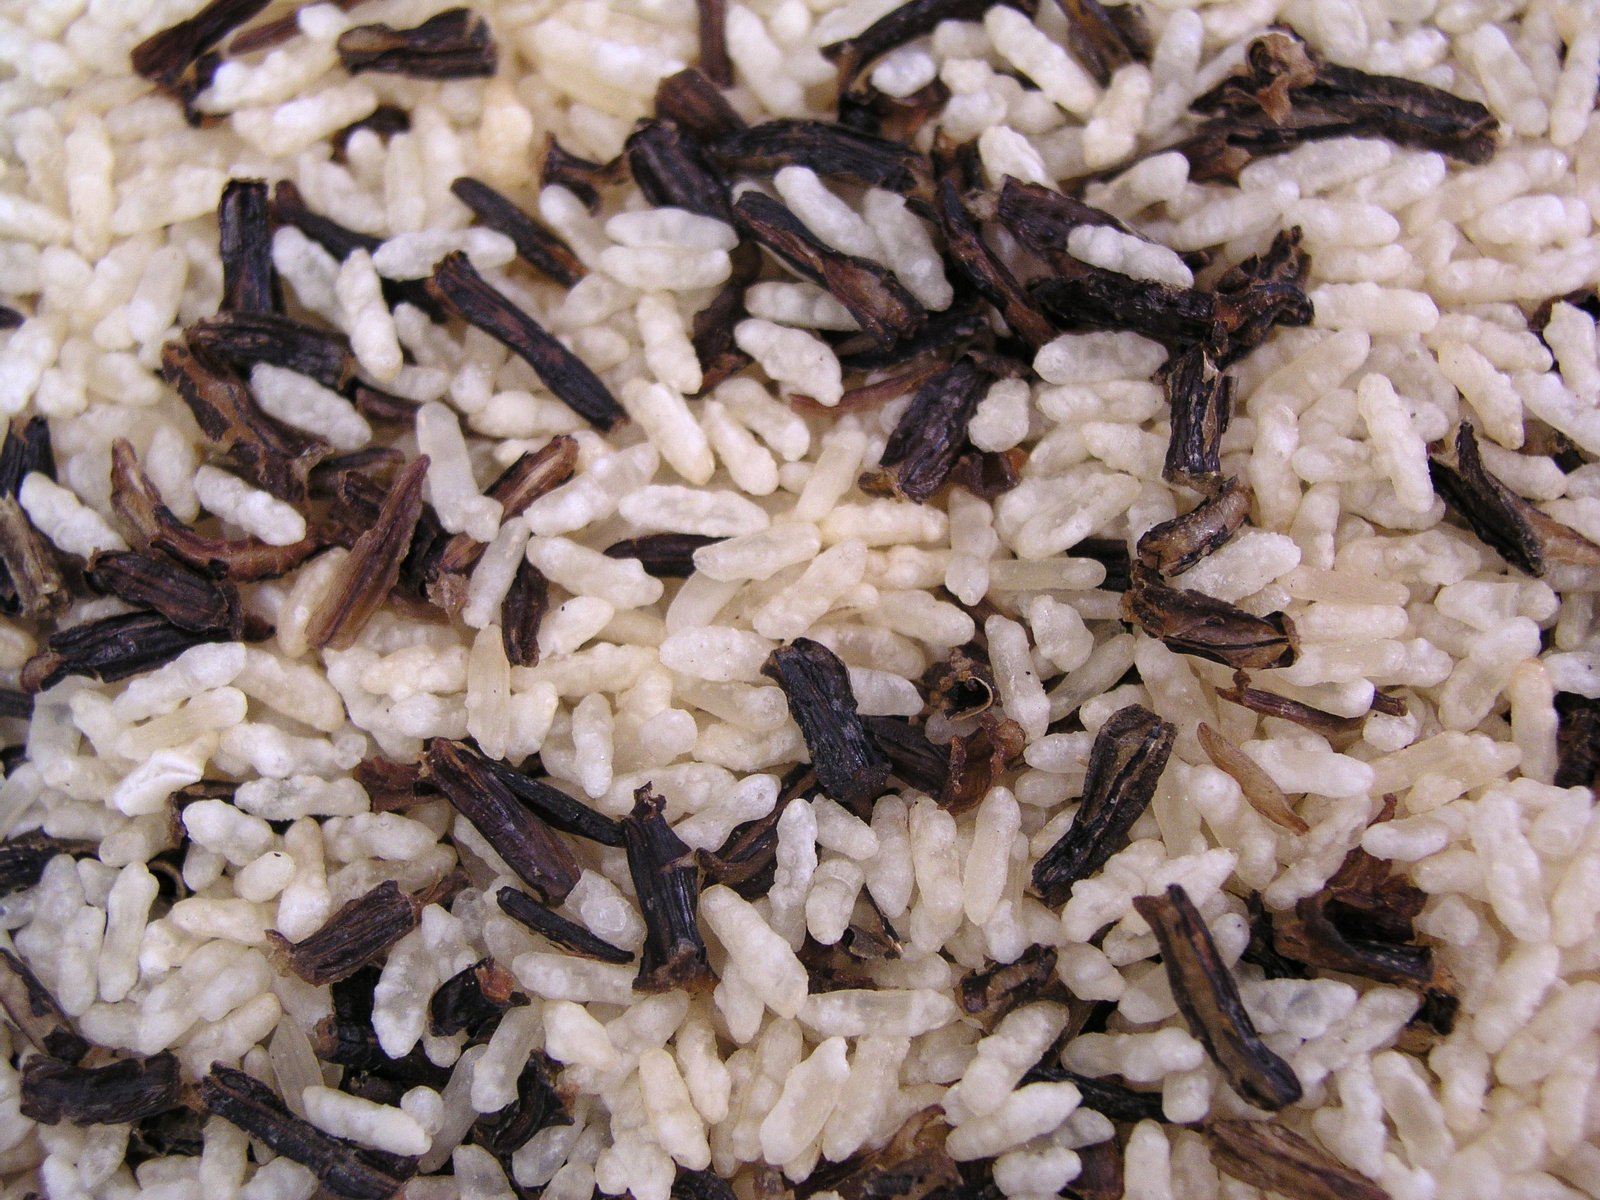 the seeds are brown and white in color